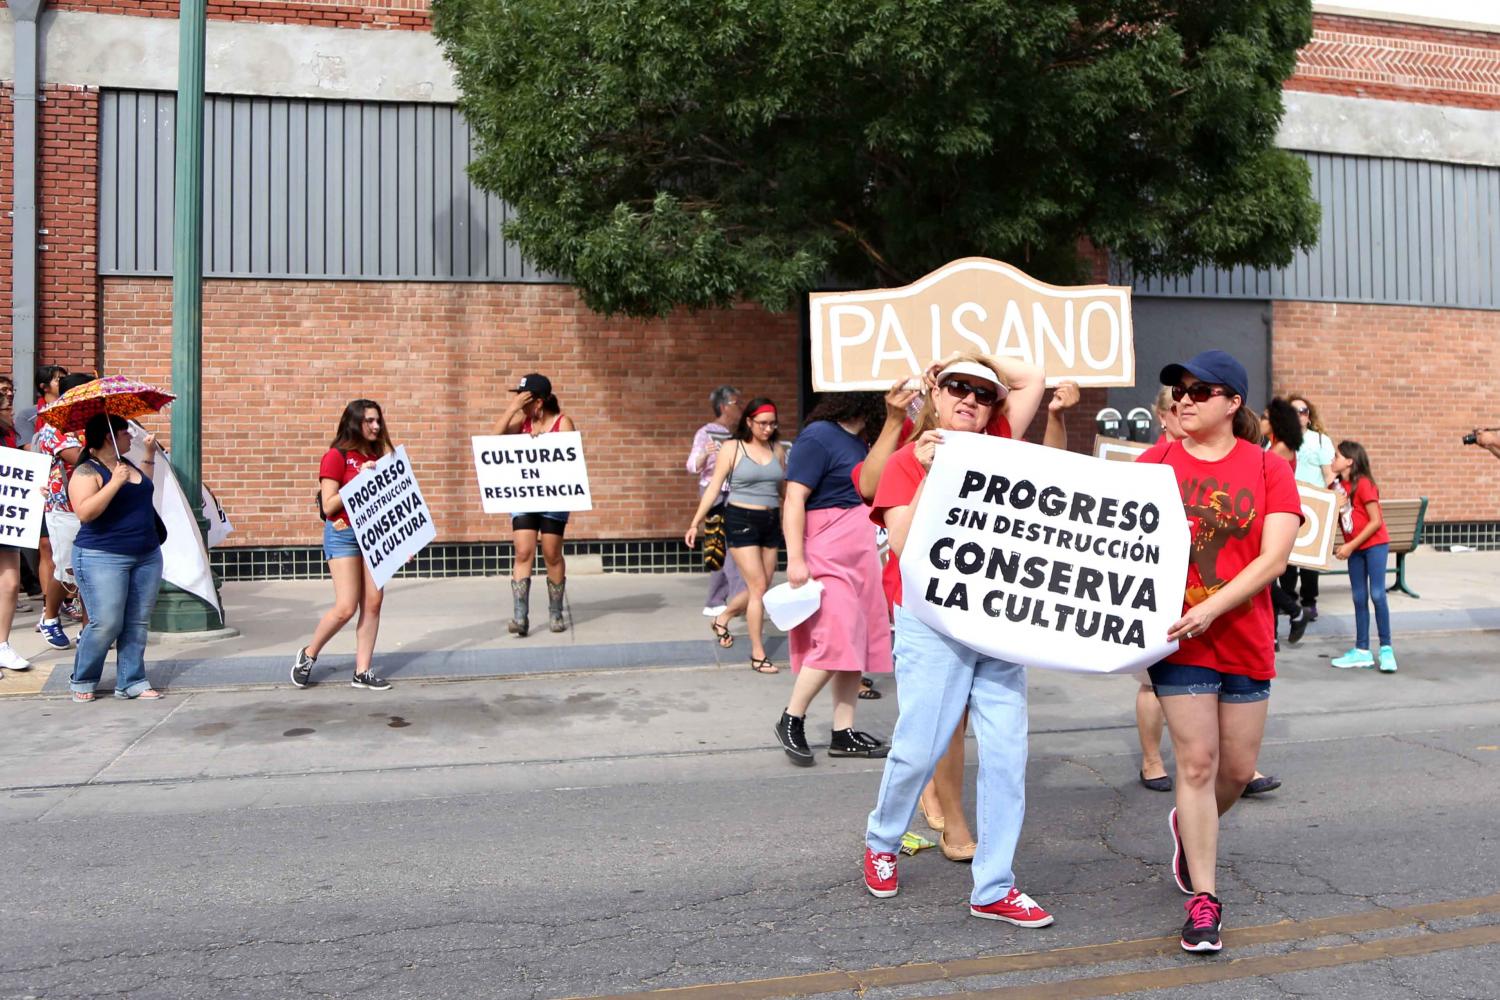 Duranguito+solidarity+march+advocates+for+preservation+of+community